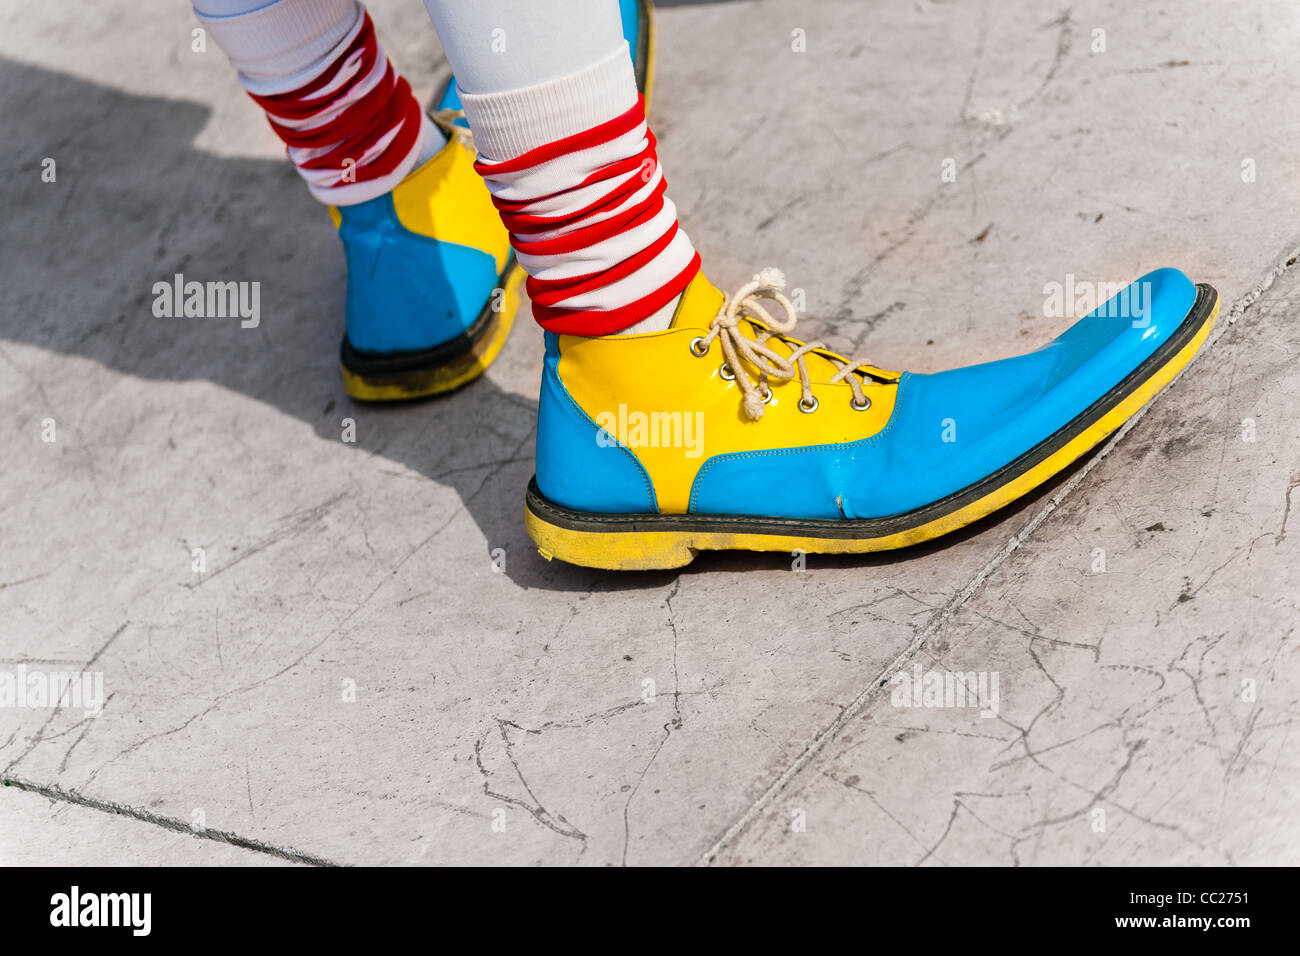 A clown wears oversized multi colored shoes during the Clown Congress ...